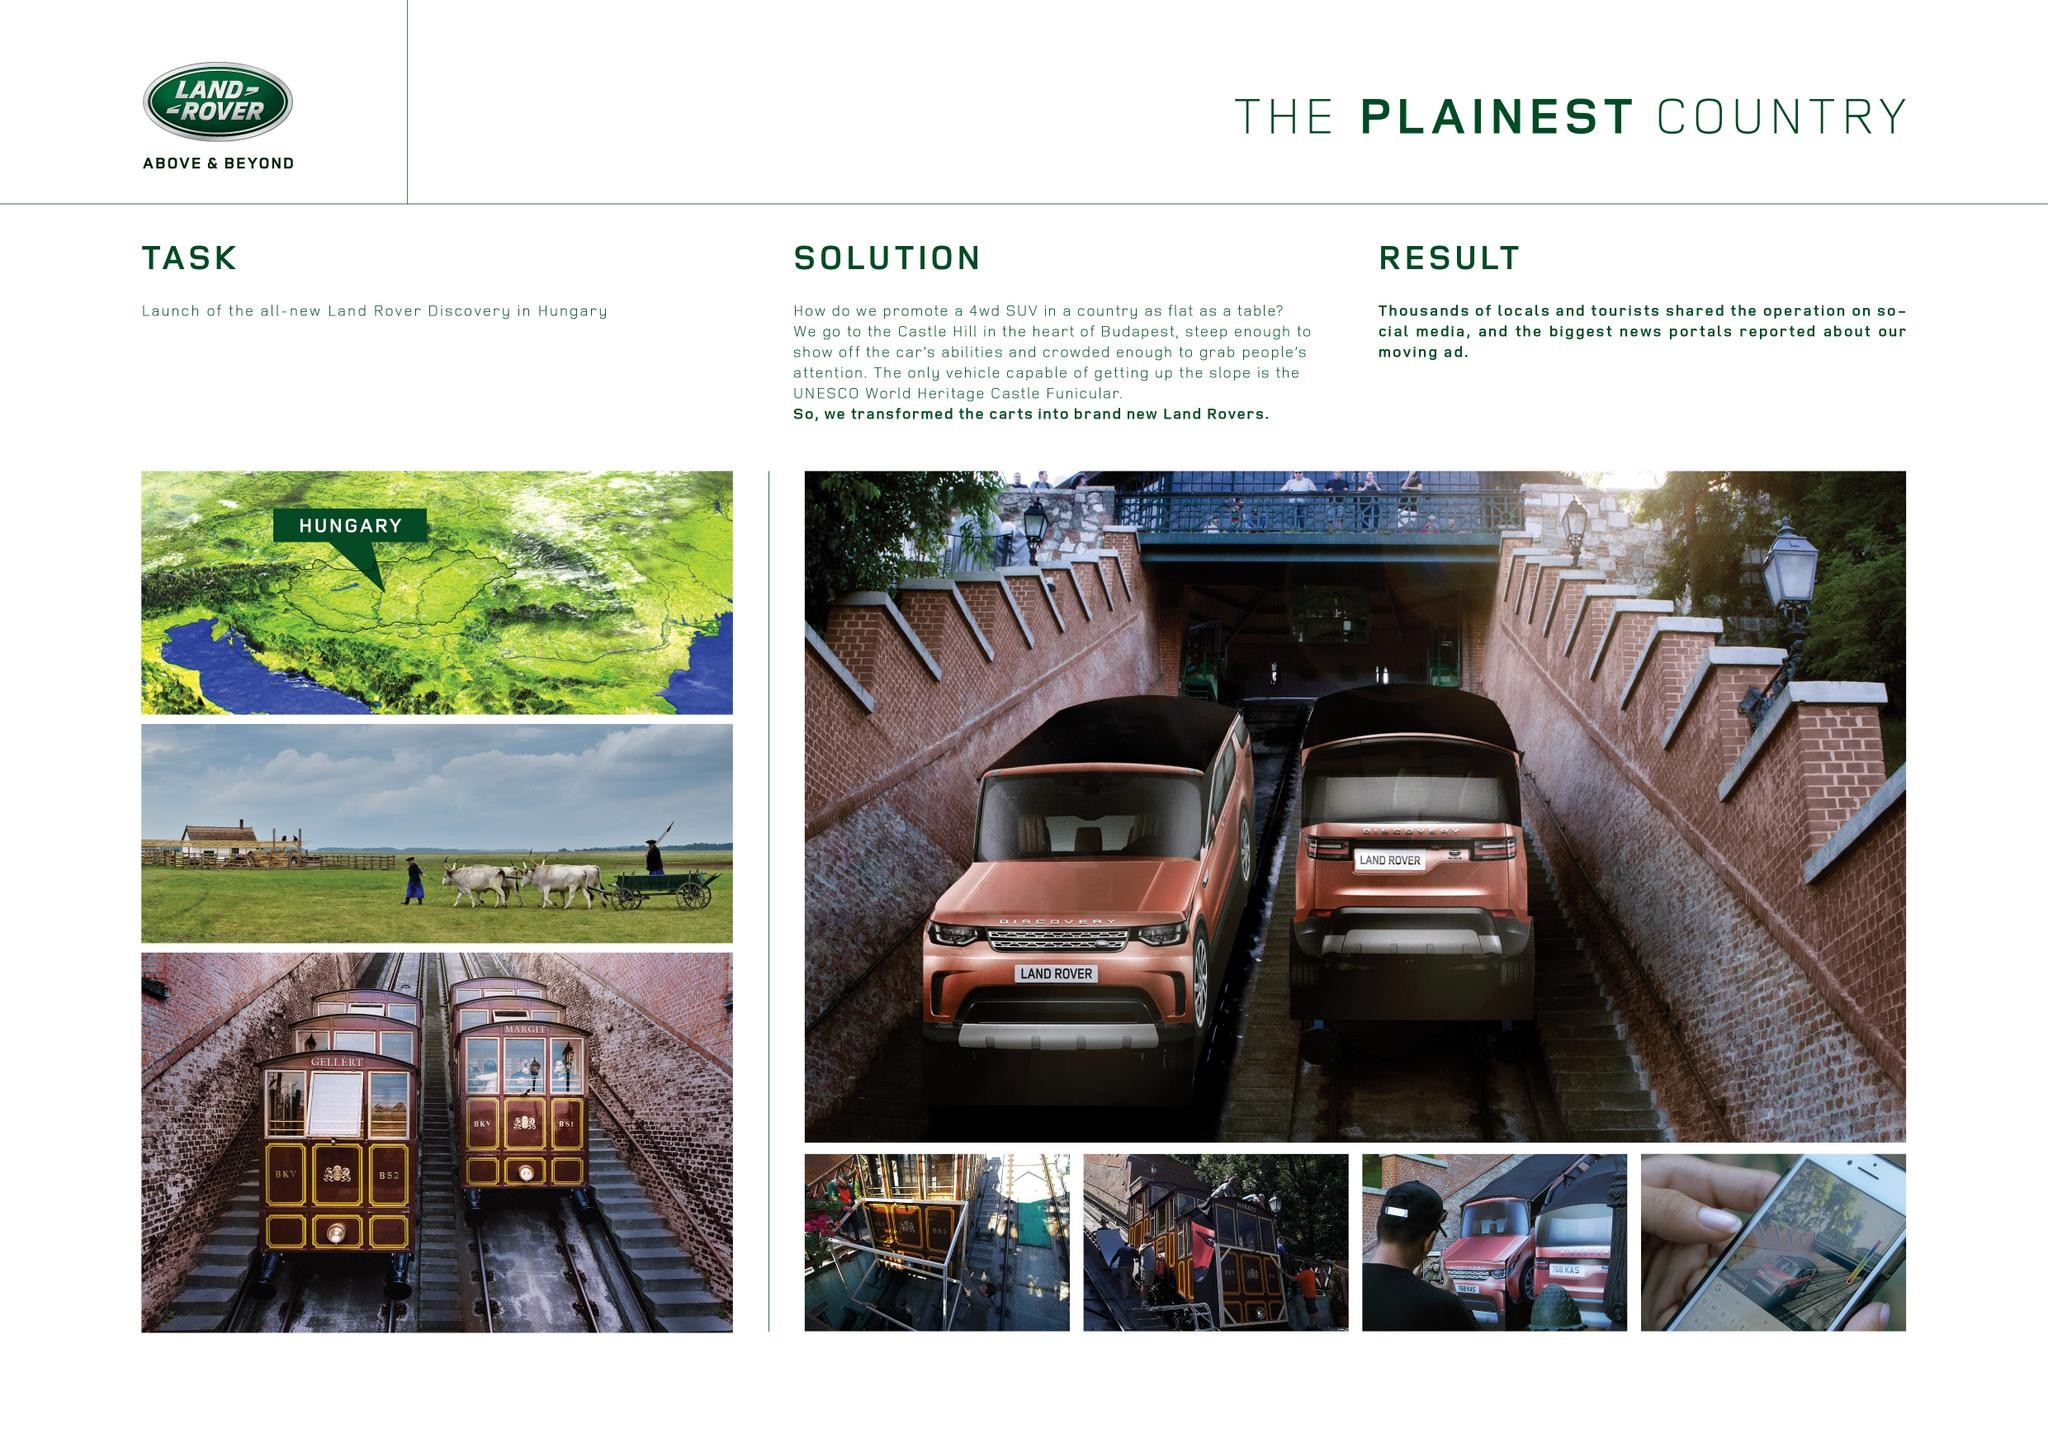 Land Rover Discovery - The plainest country